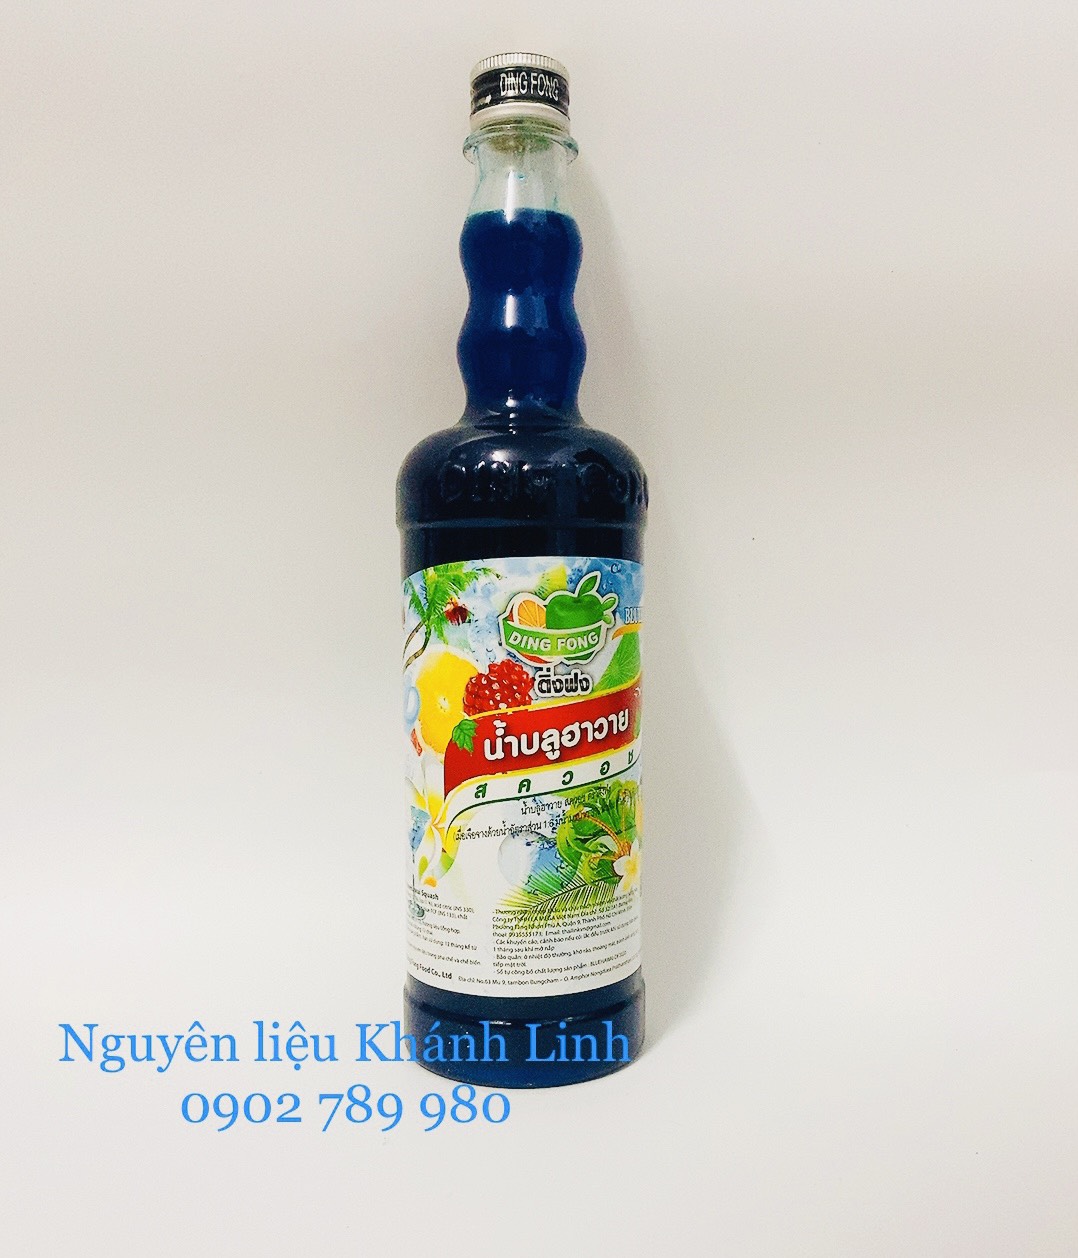 Syrup Vỏ Cam Ding Fong 760ml